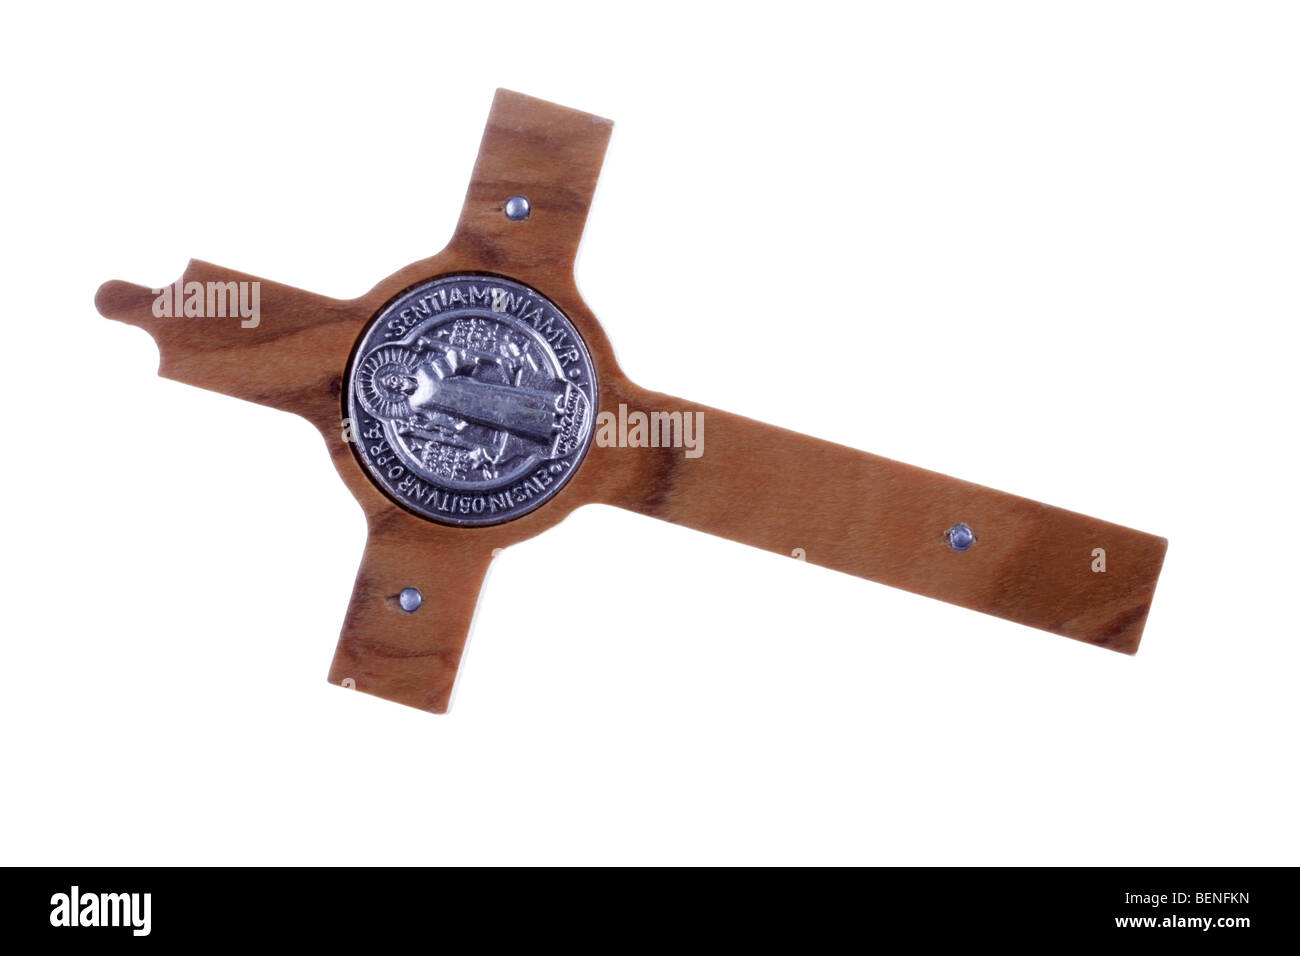 Saint Benedict cross with his seal and made of wood. Stock Photo